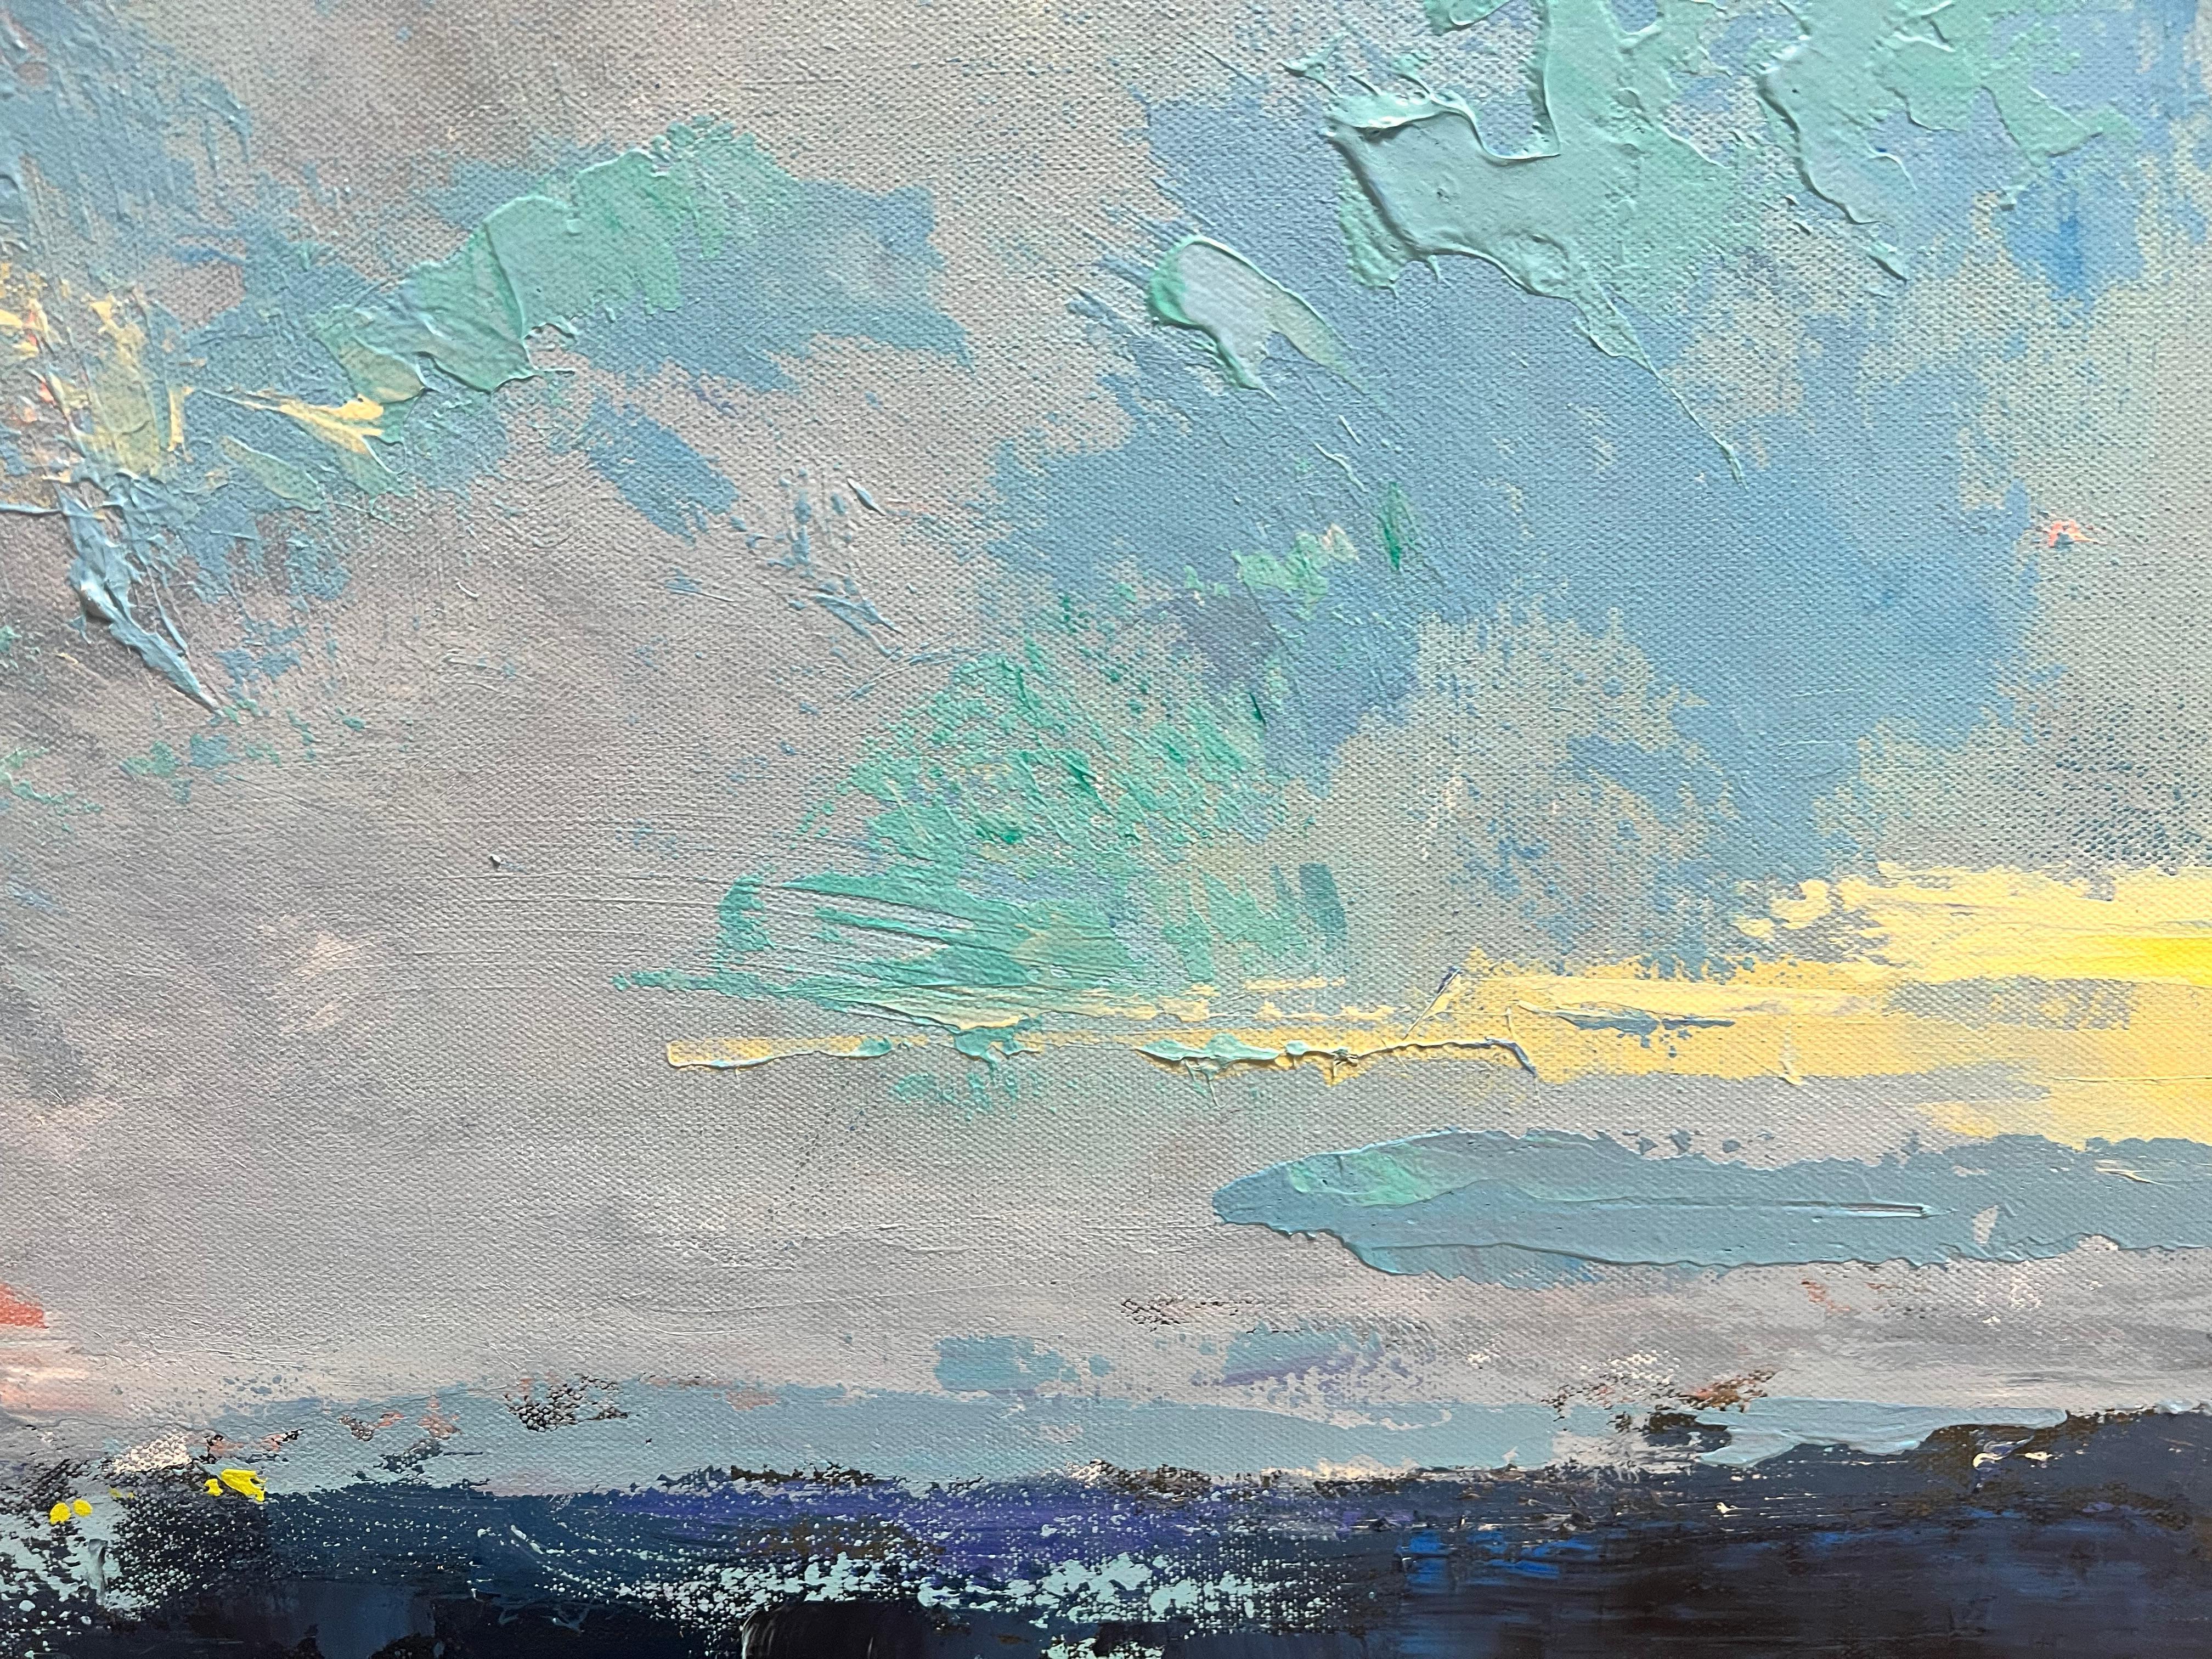 Current Bliss - Impressionist Painting by Noah Desmond